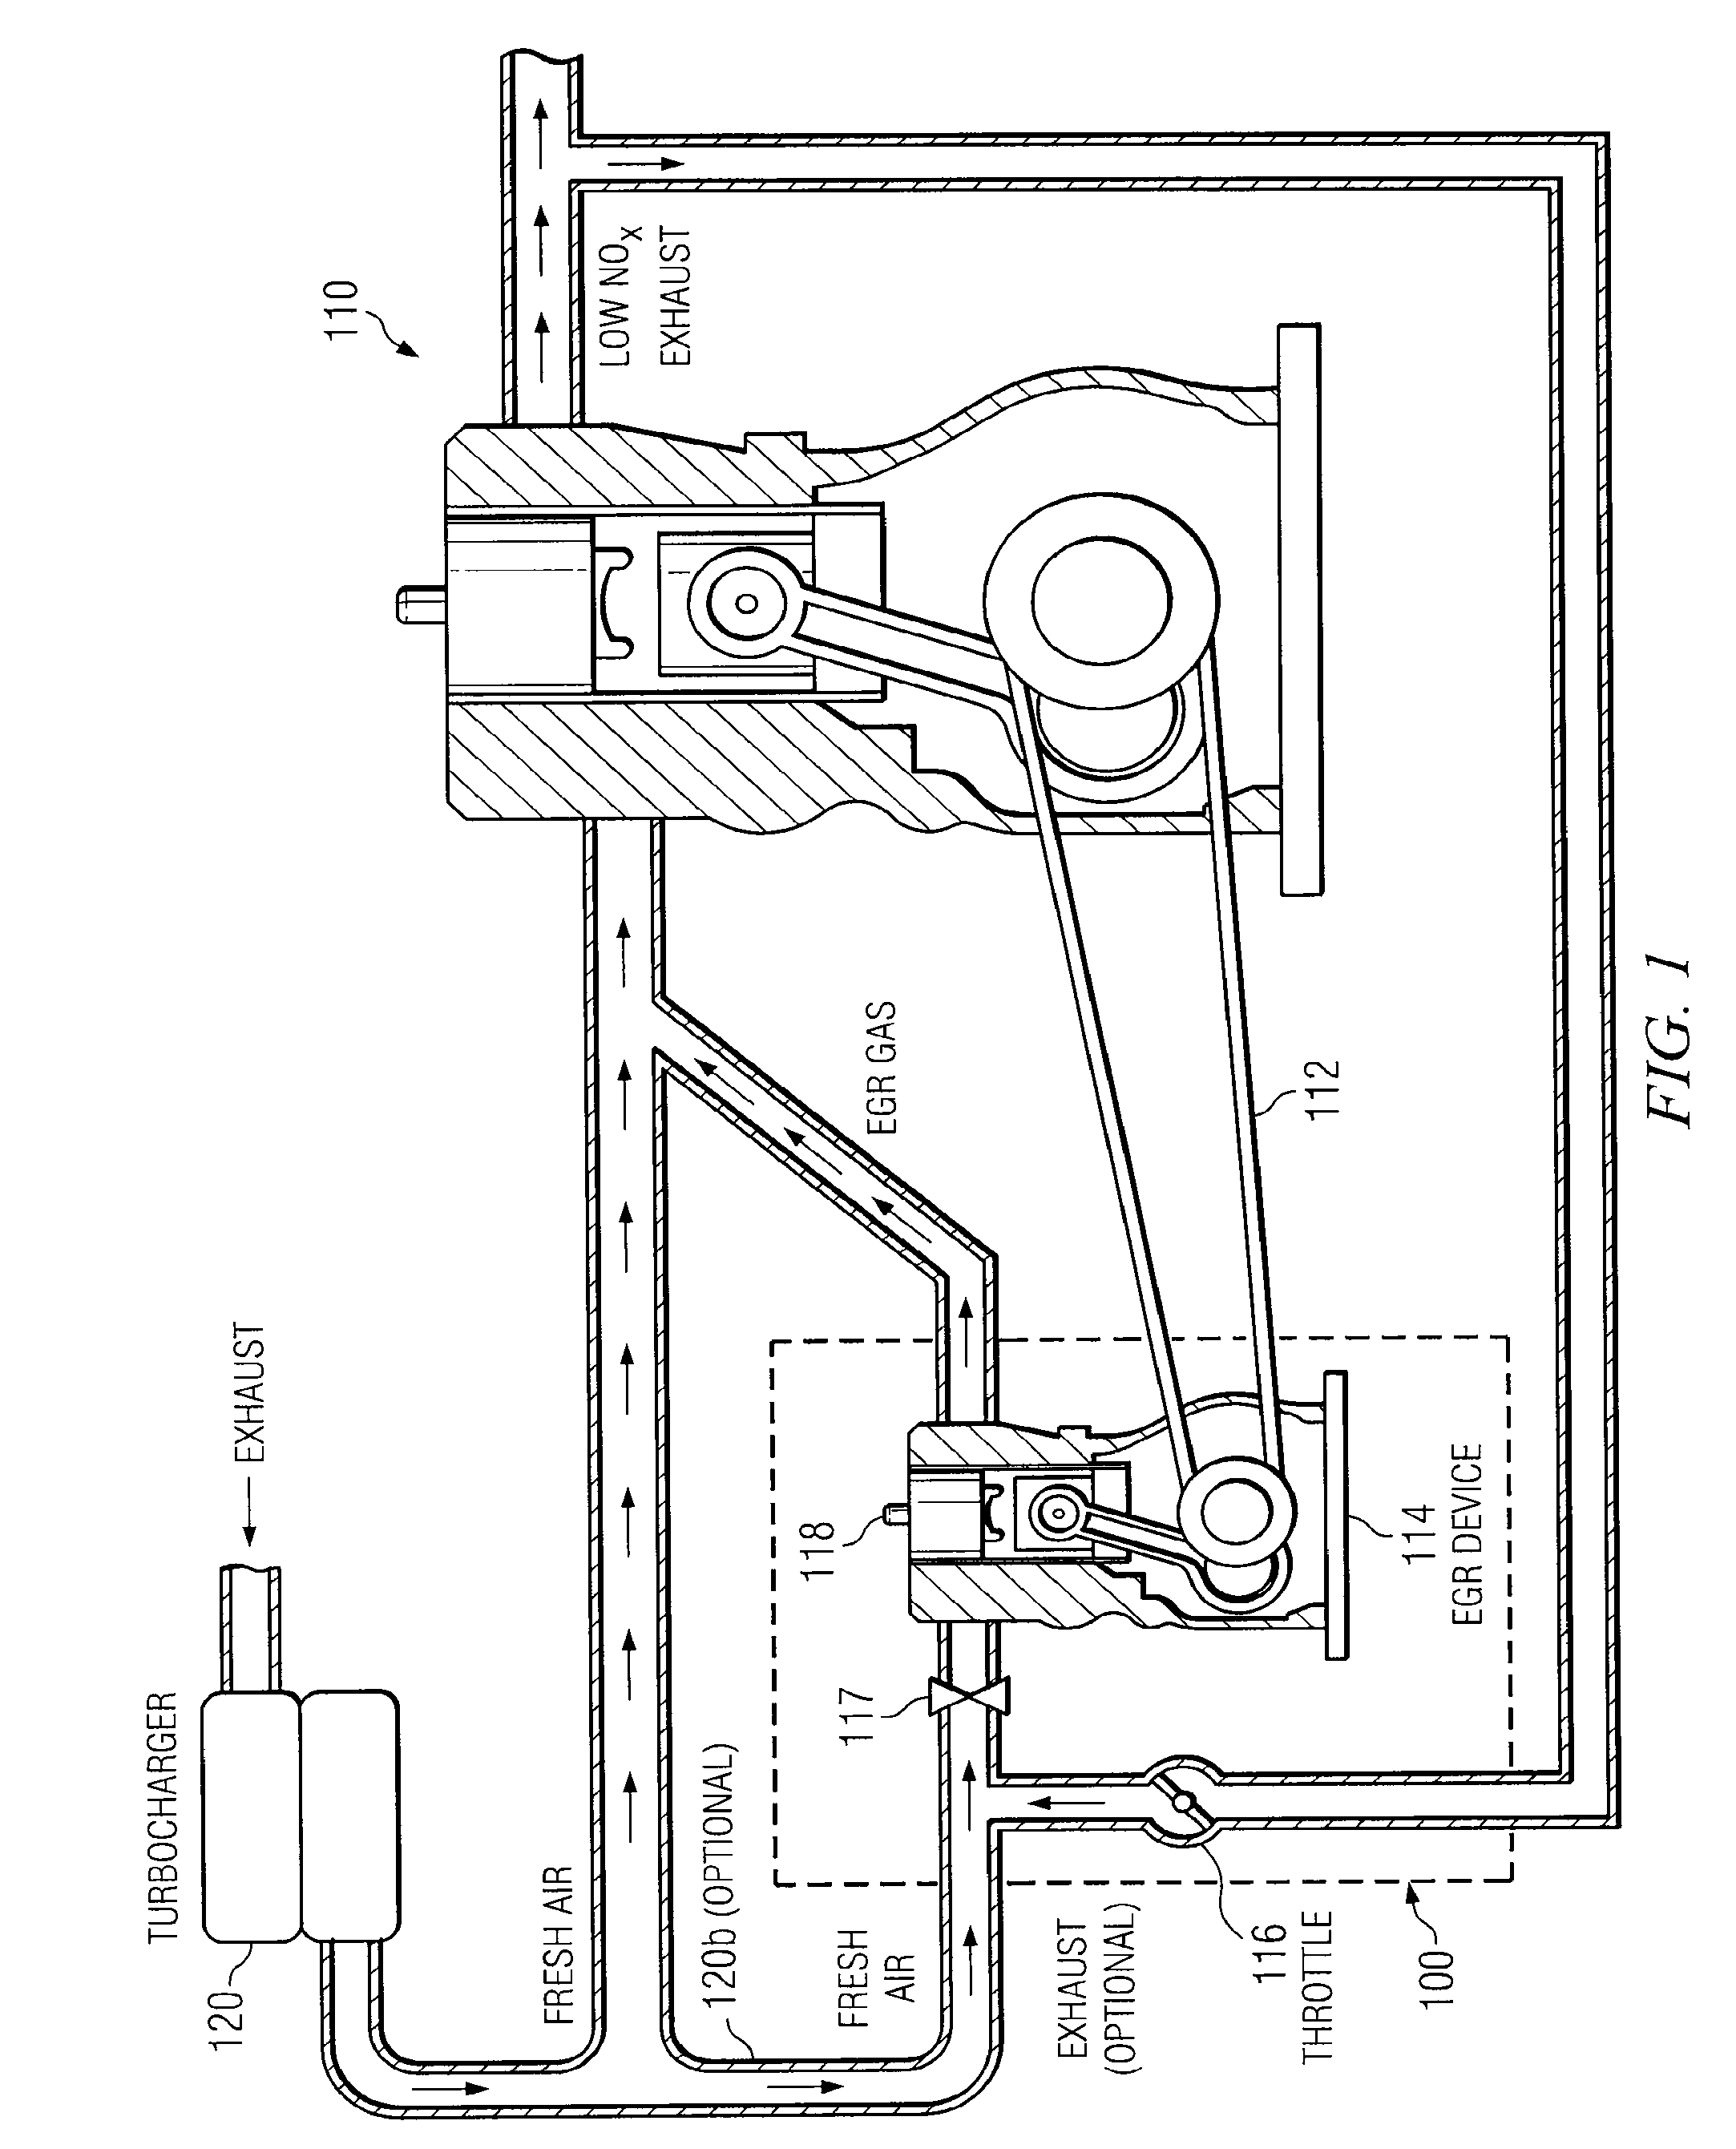 Secondary internal combustion device for providing exhaust gas to EGR-equipped engine